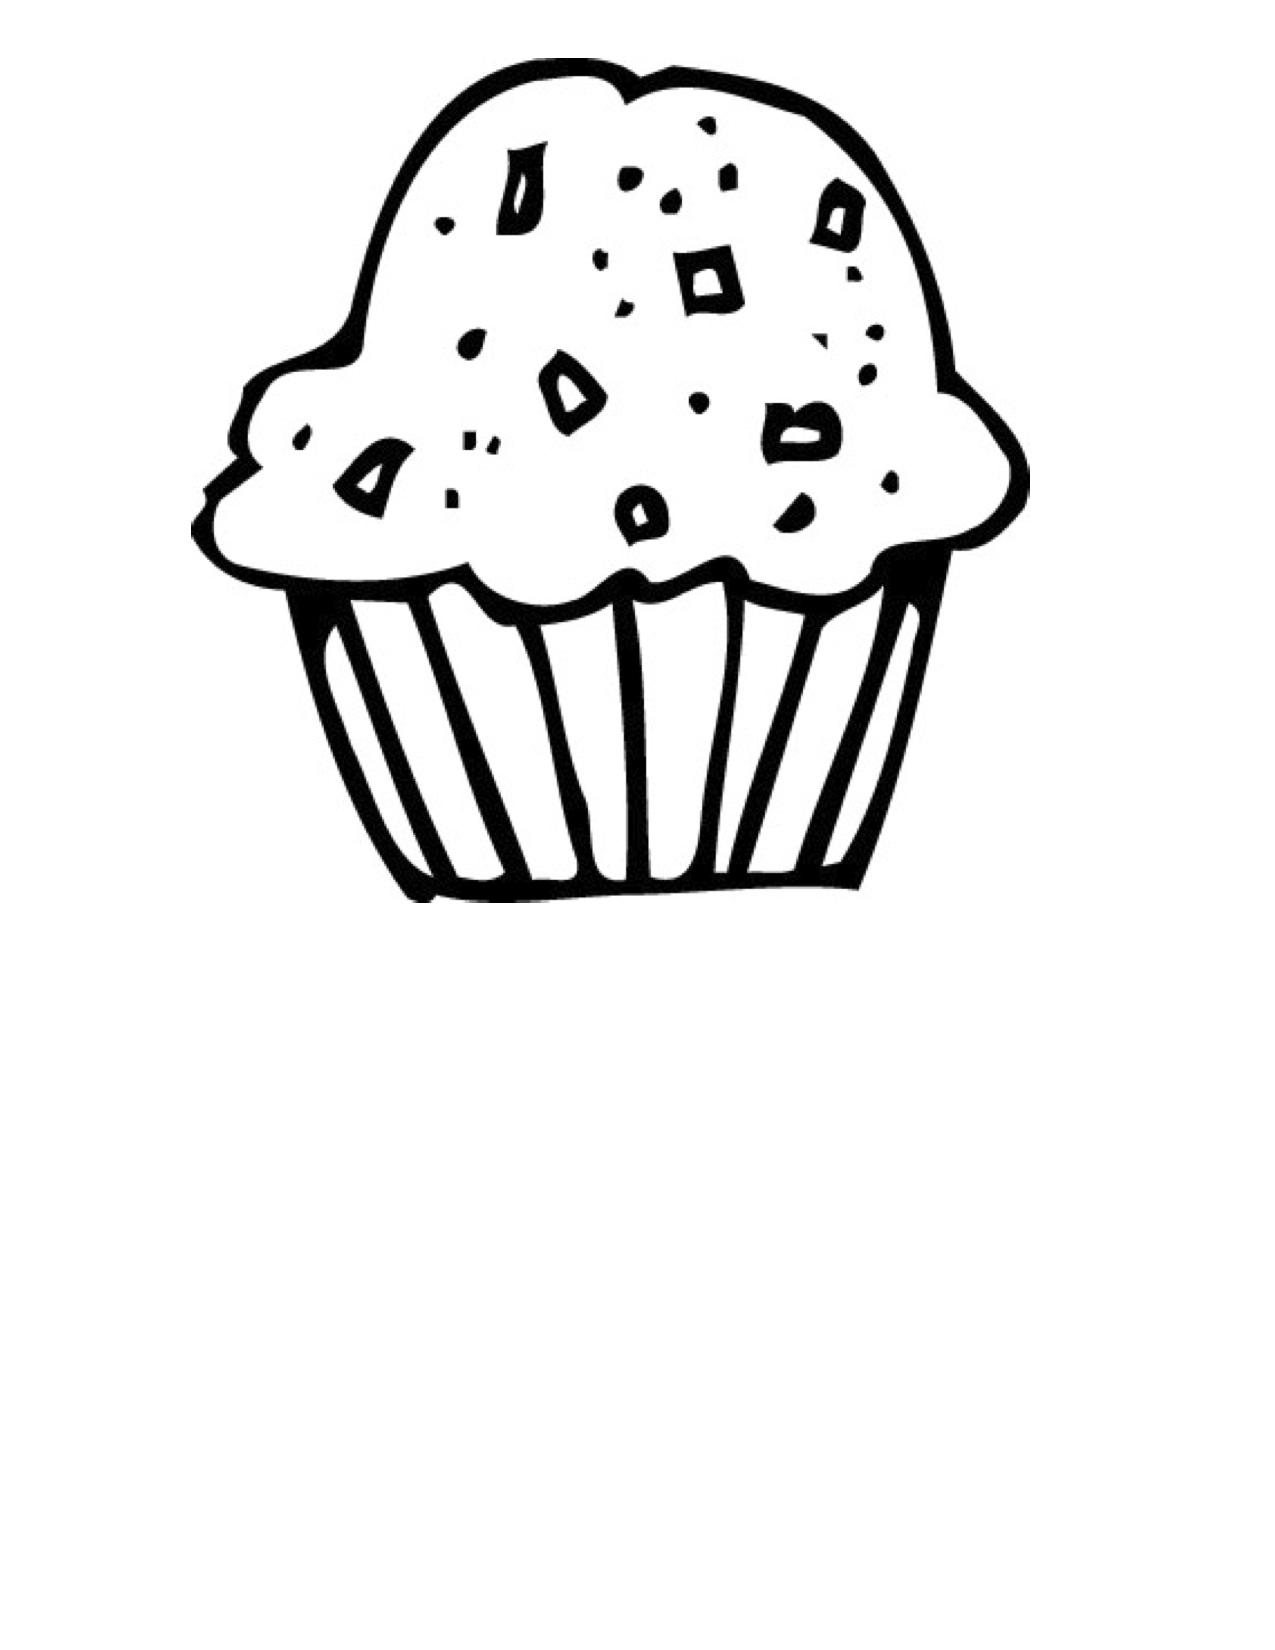 cupcake clipart black and white outline clip